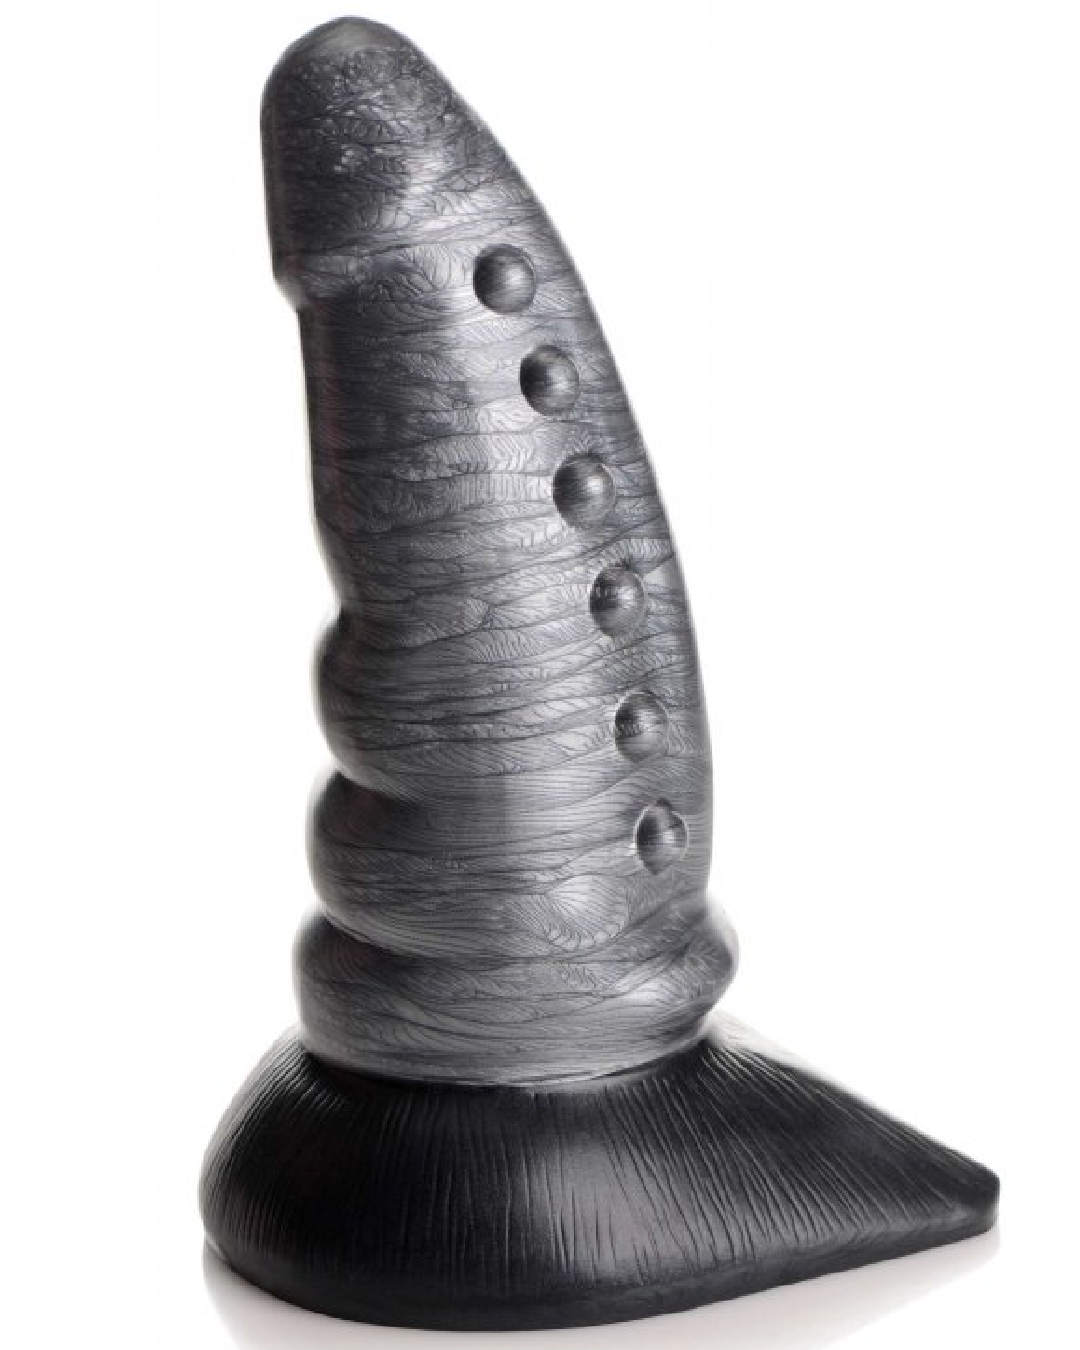 Creature Cocks Beastly Tapered Bumpy Silicone Tentacle Dildo side view of texture nubs